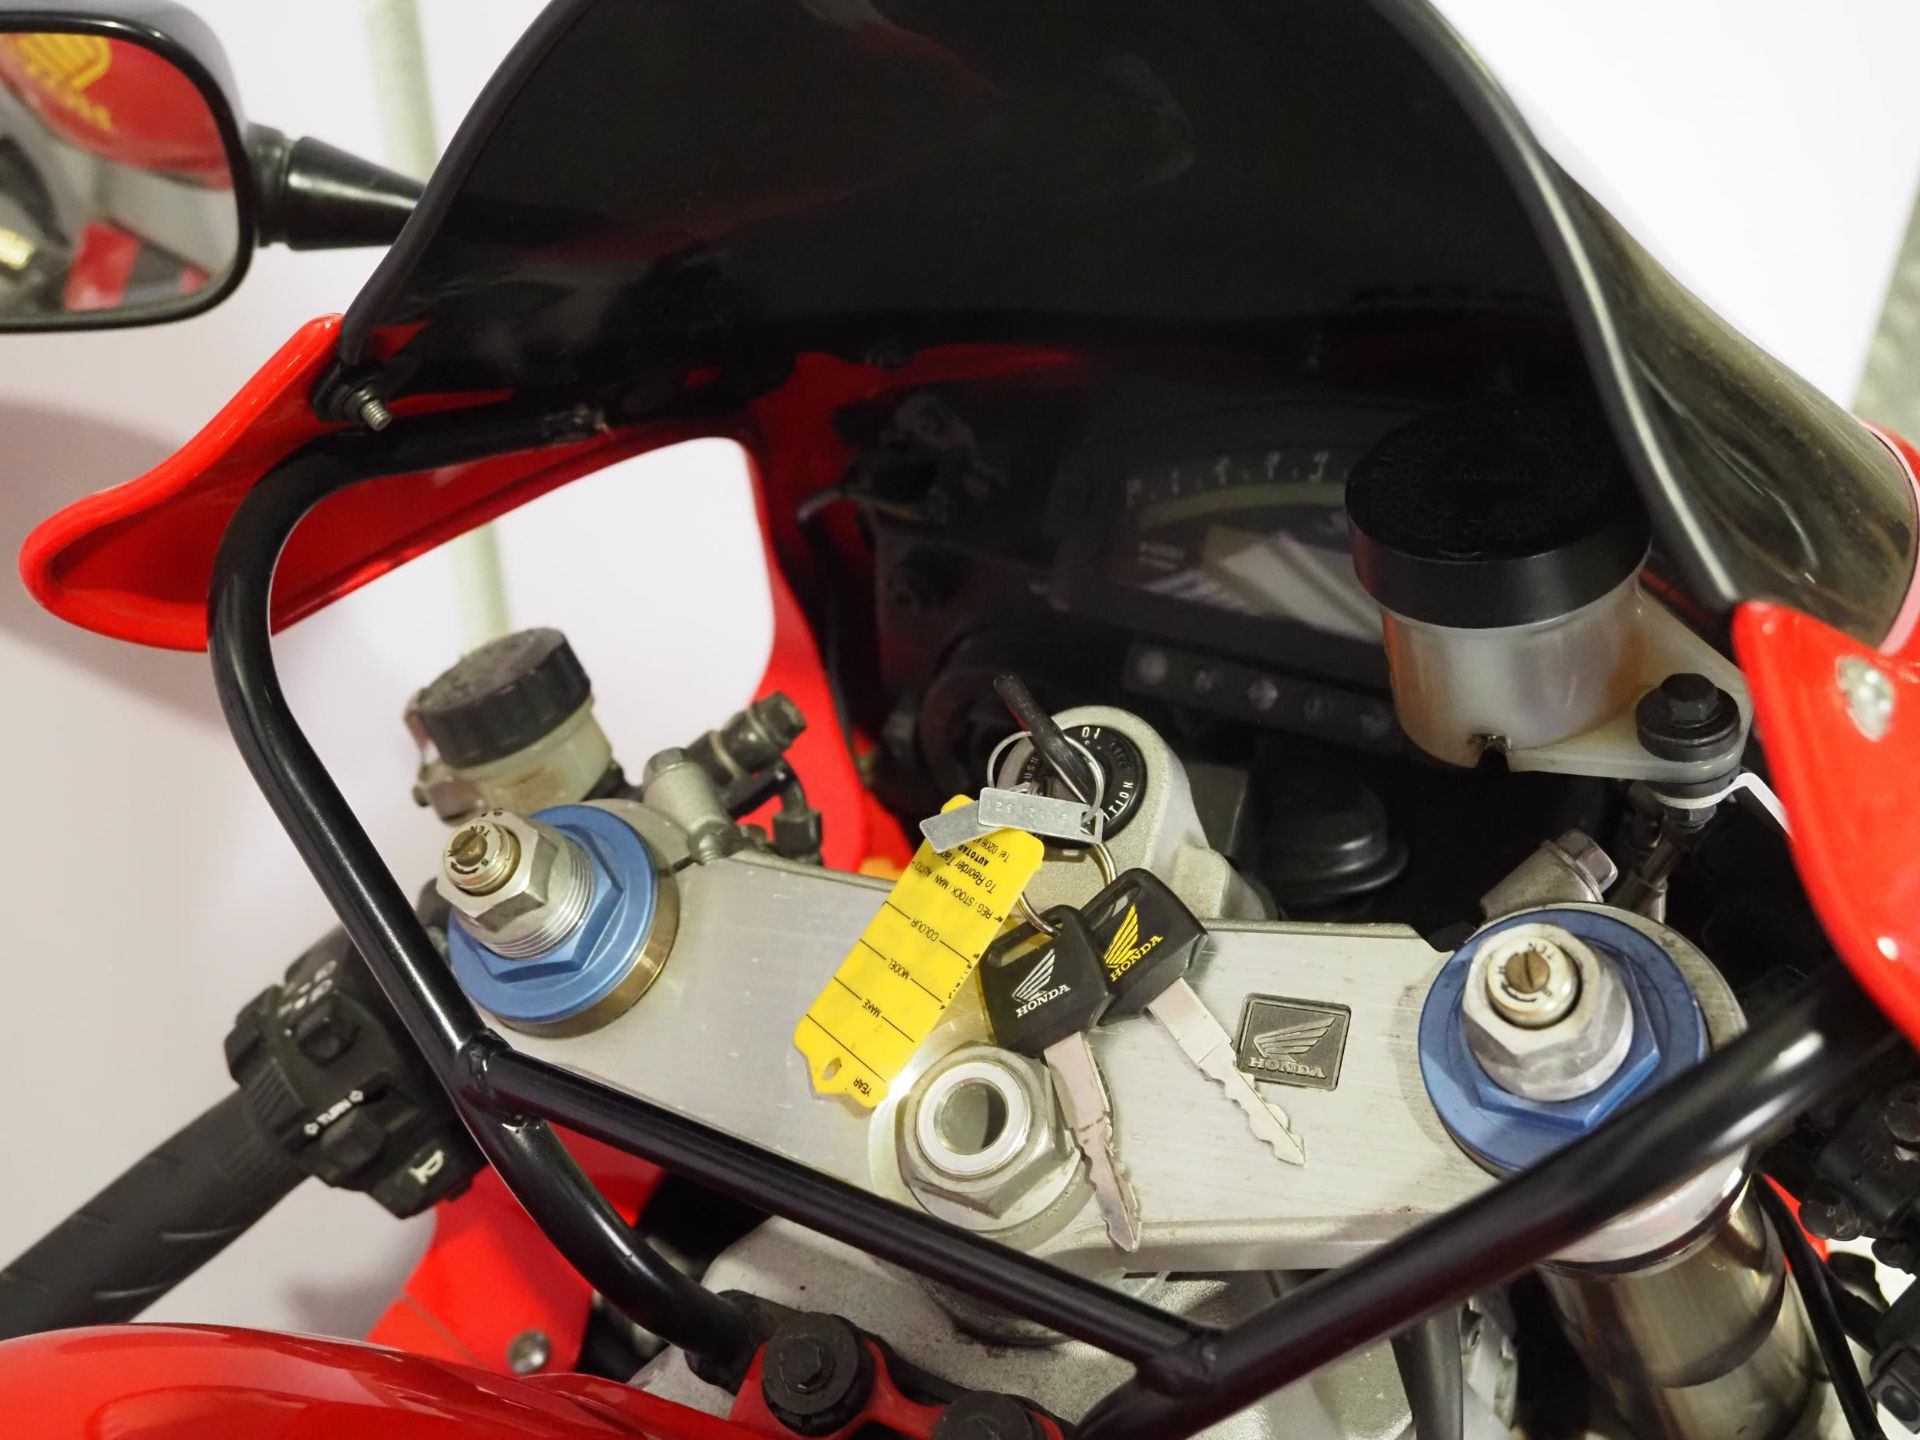 Honda VTR1000 SP-1 motorcycle. 2000. 999cc Last ridden in 2015 before being dry stored. Battery - Image 8 of 9